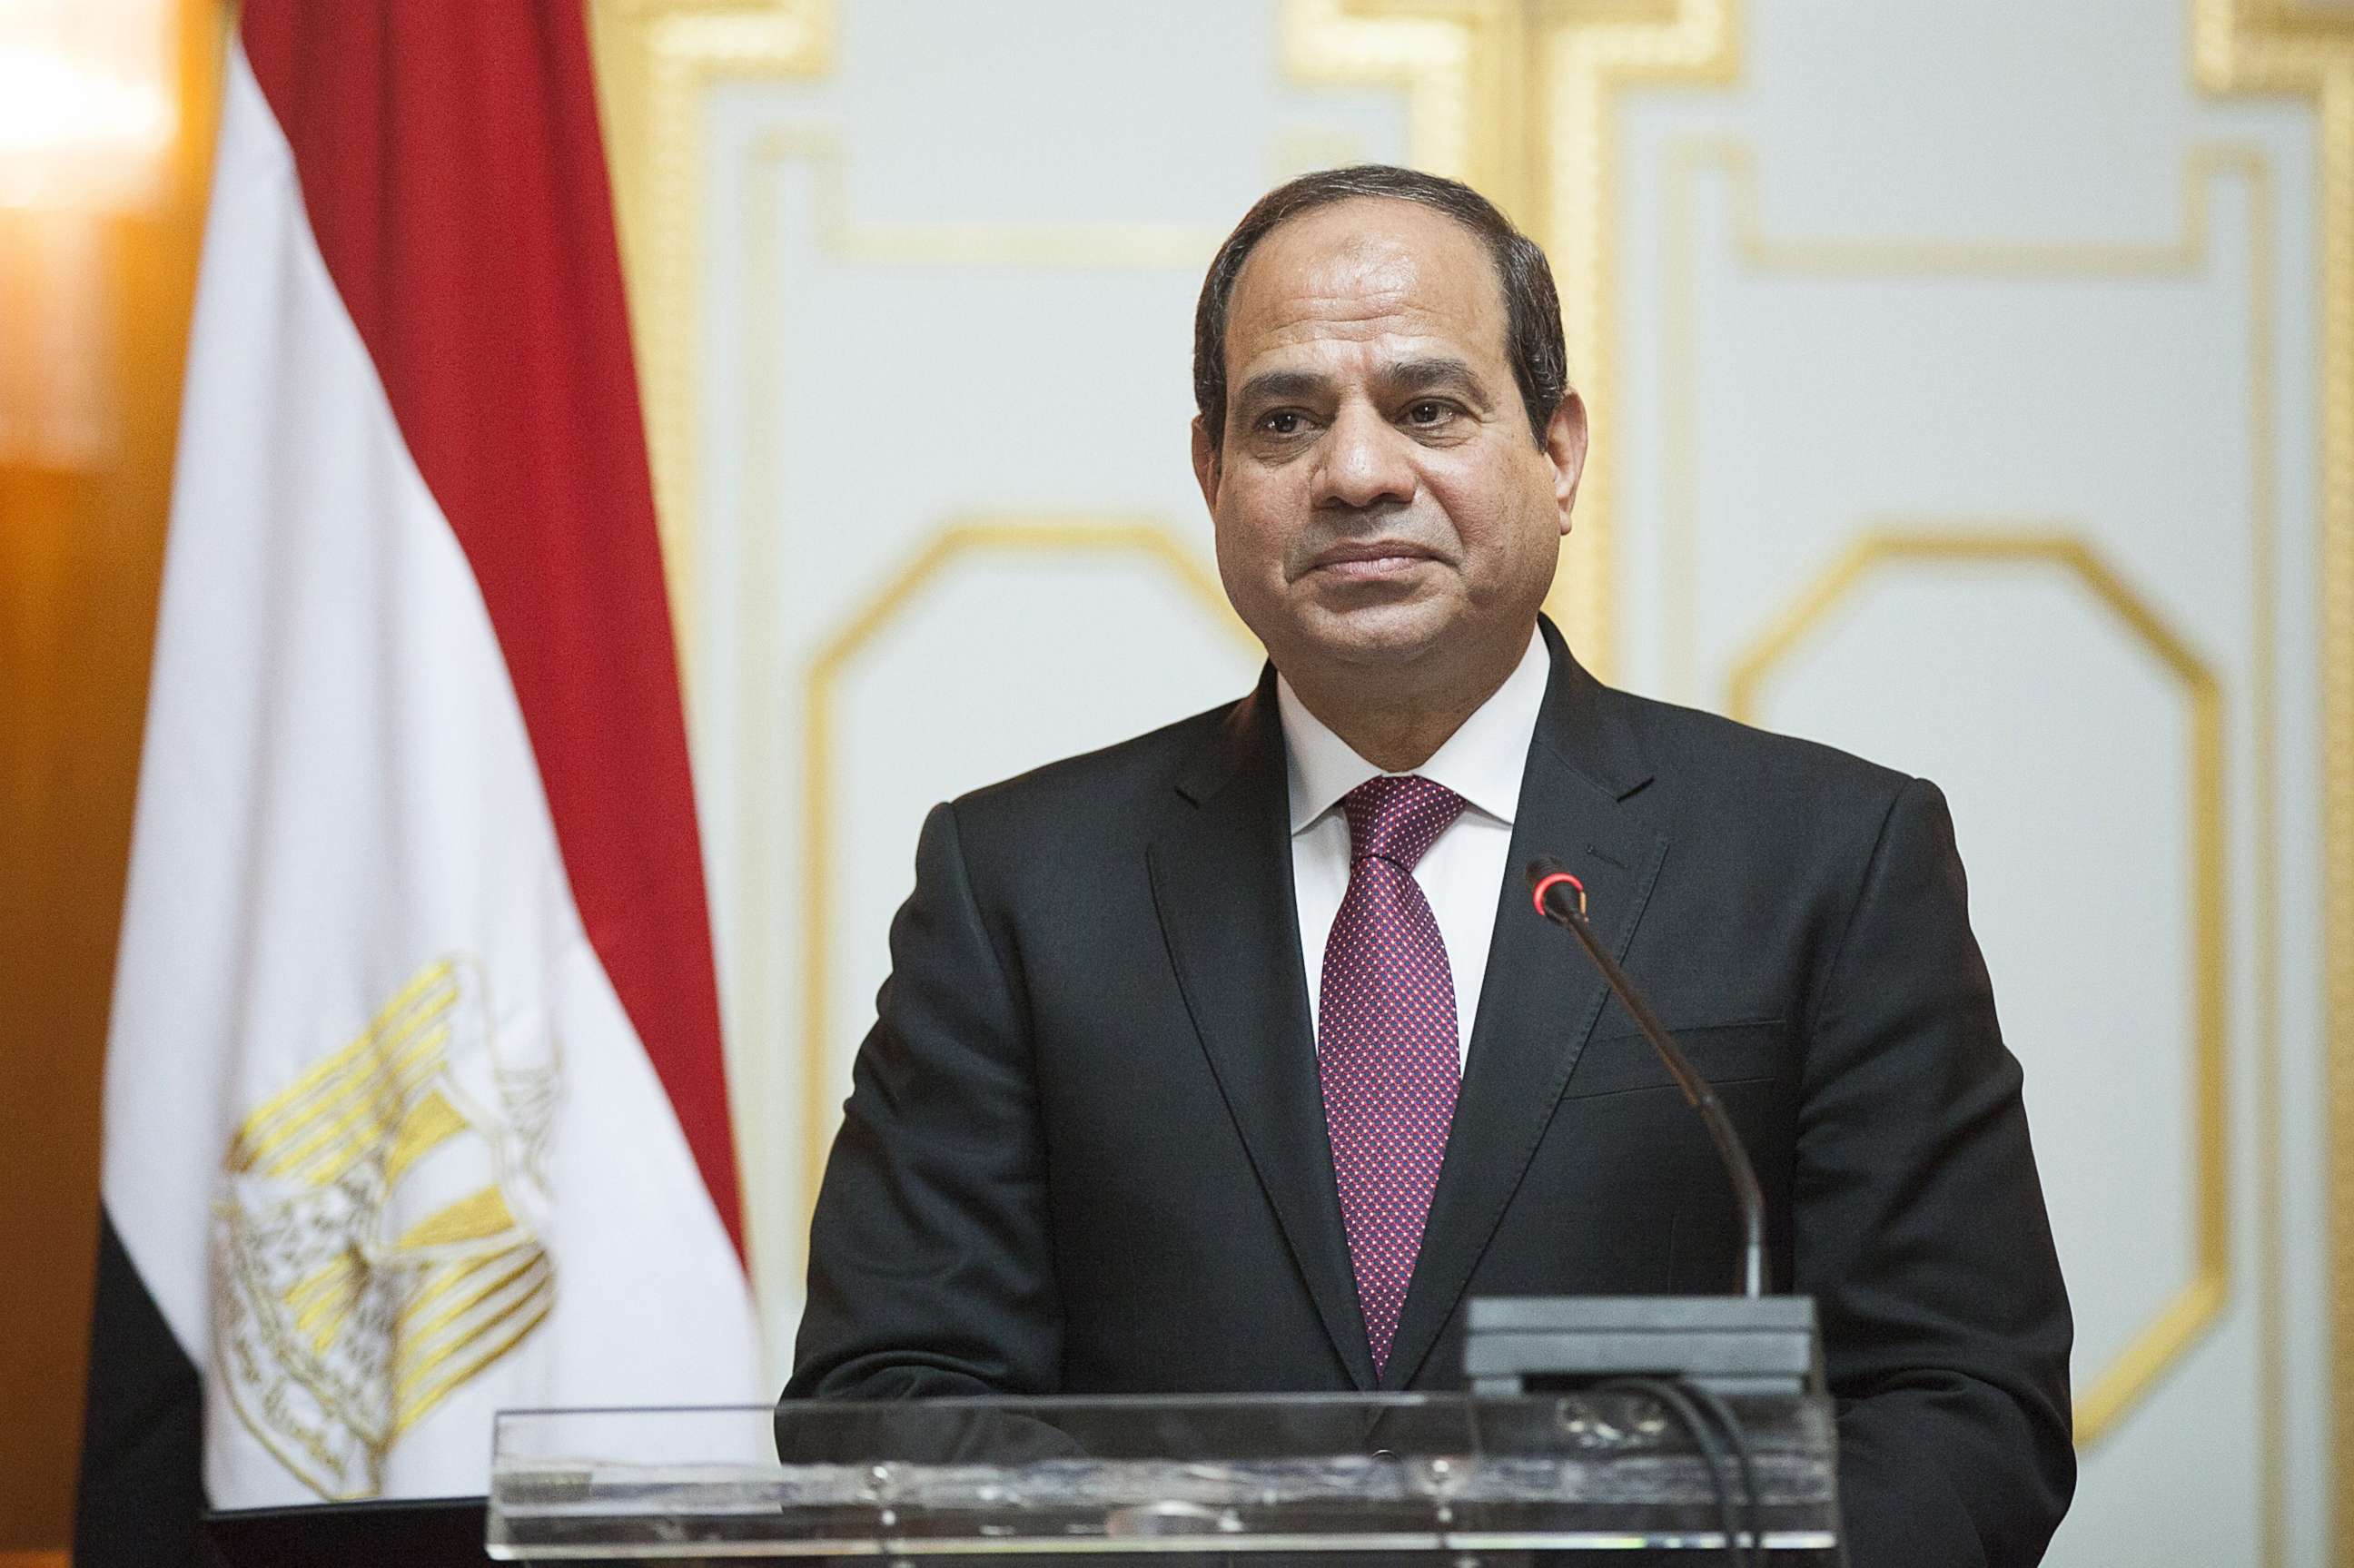 PHOTO: FILE PHOTO: Eyptian President Abdel Fattah el-Sisi gives a press conference in Addis Ababa on March 24, 2015.